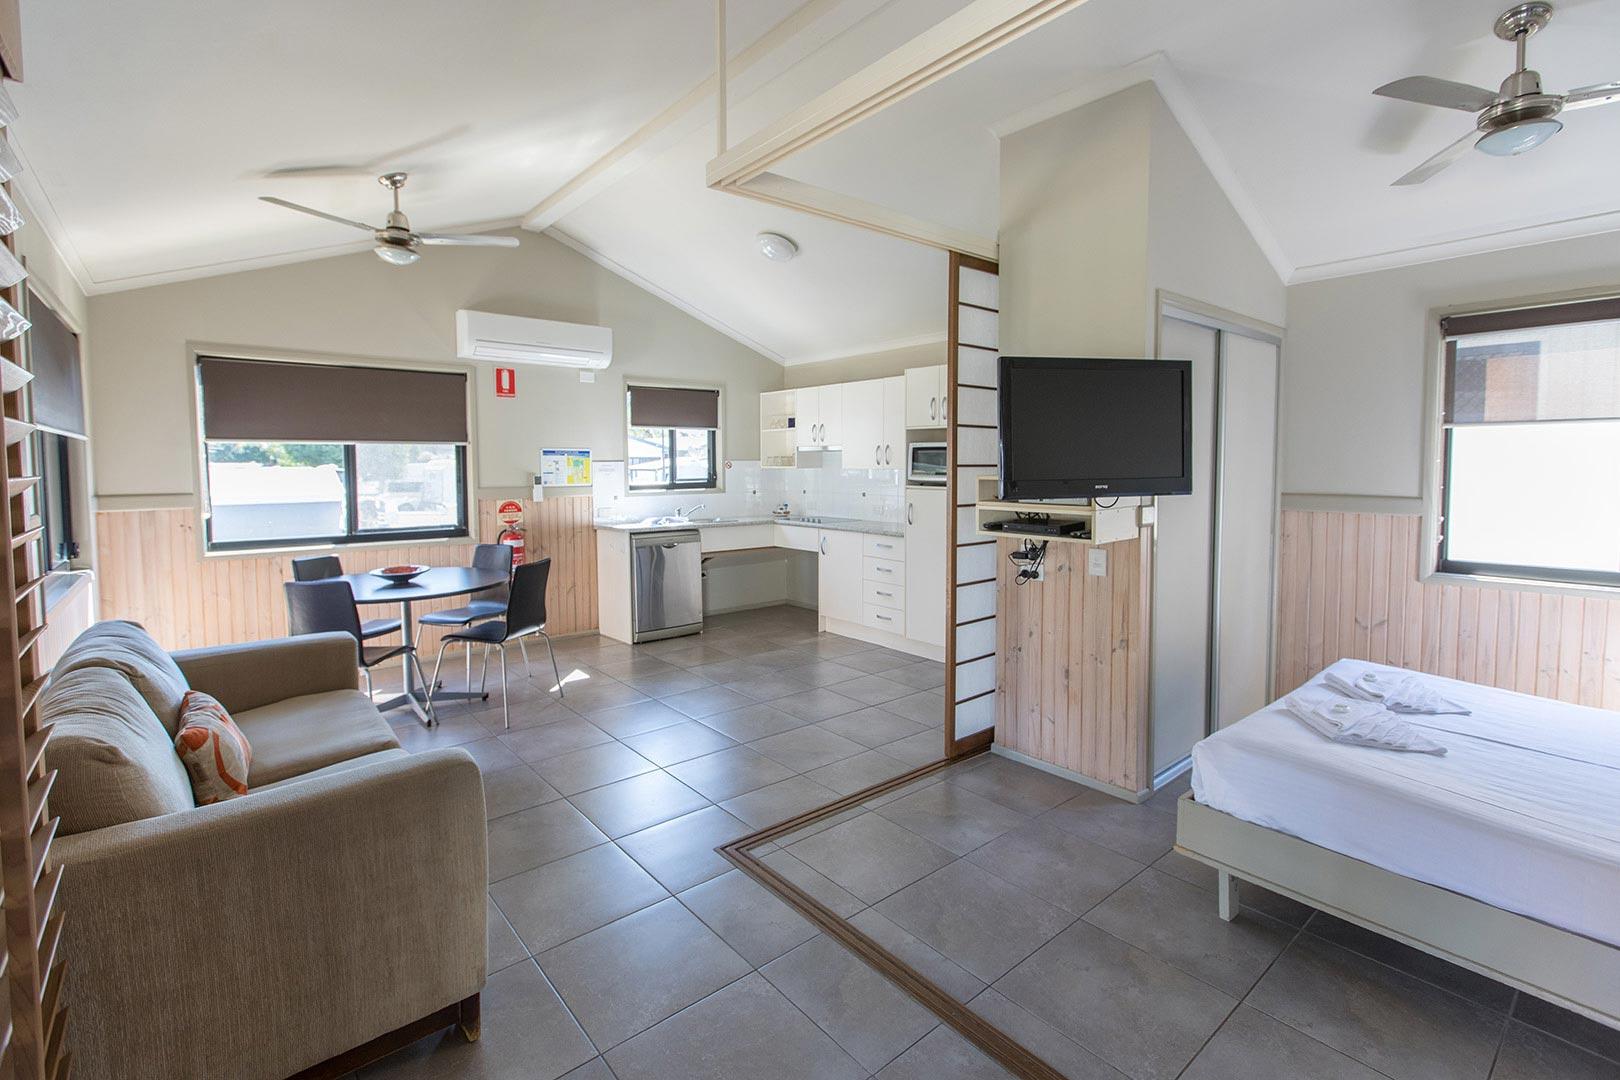 The Accessible Cabin at Burleigh Beach Tourist Park. The bedroom opens up to the open plan living, kitchen and dining area.